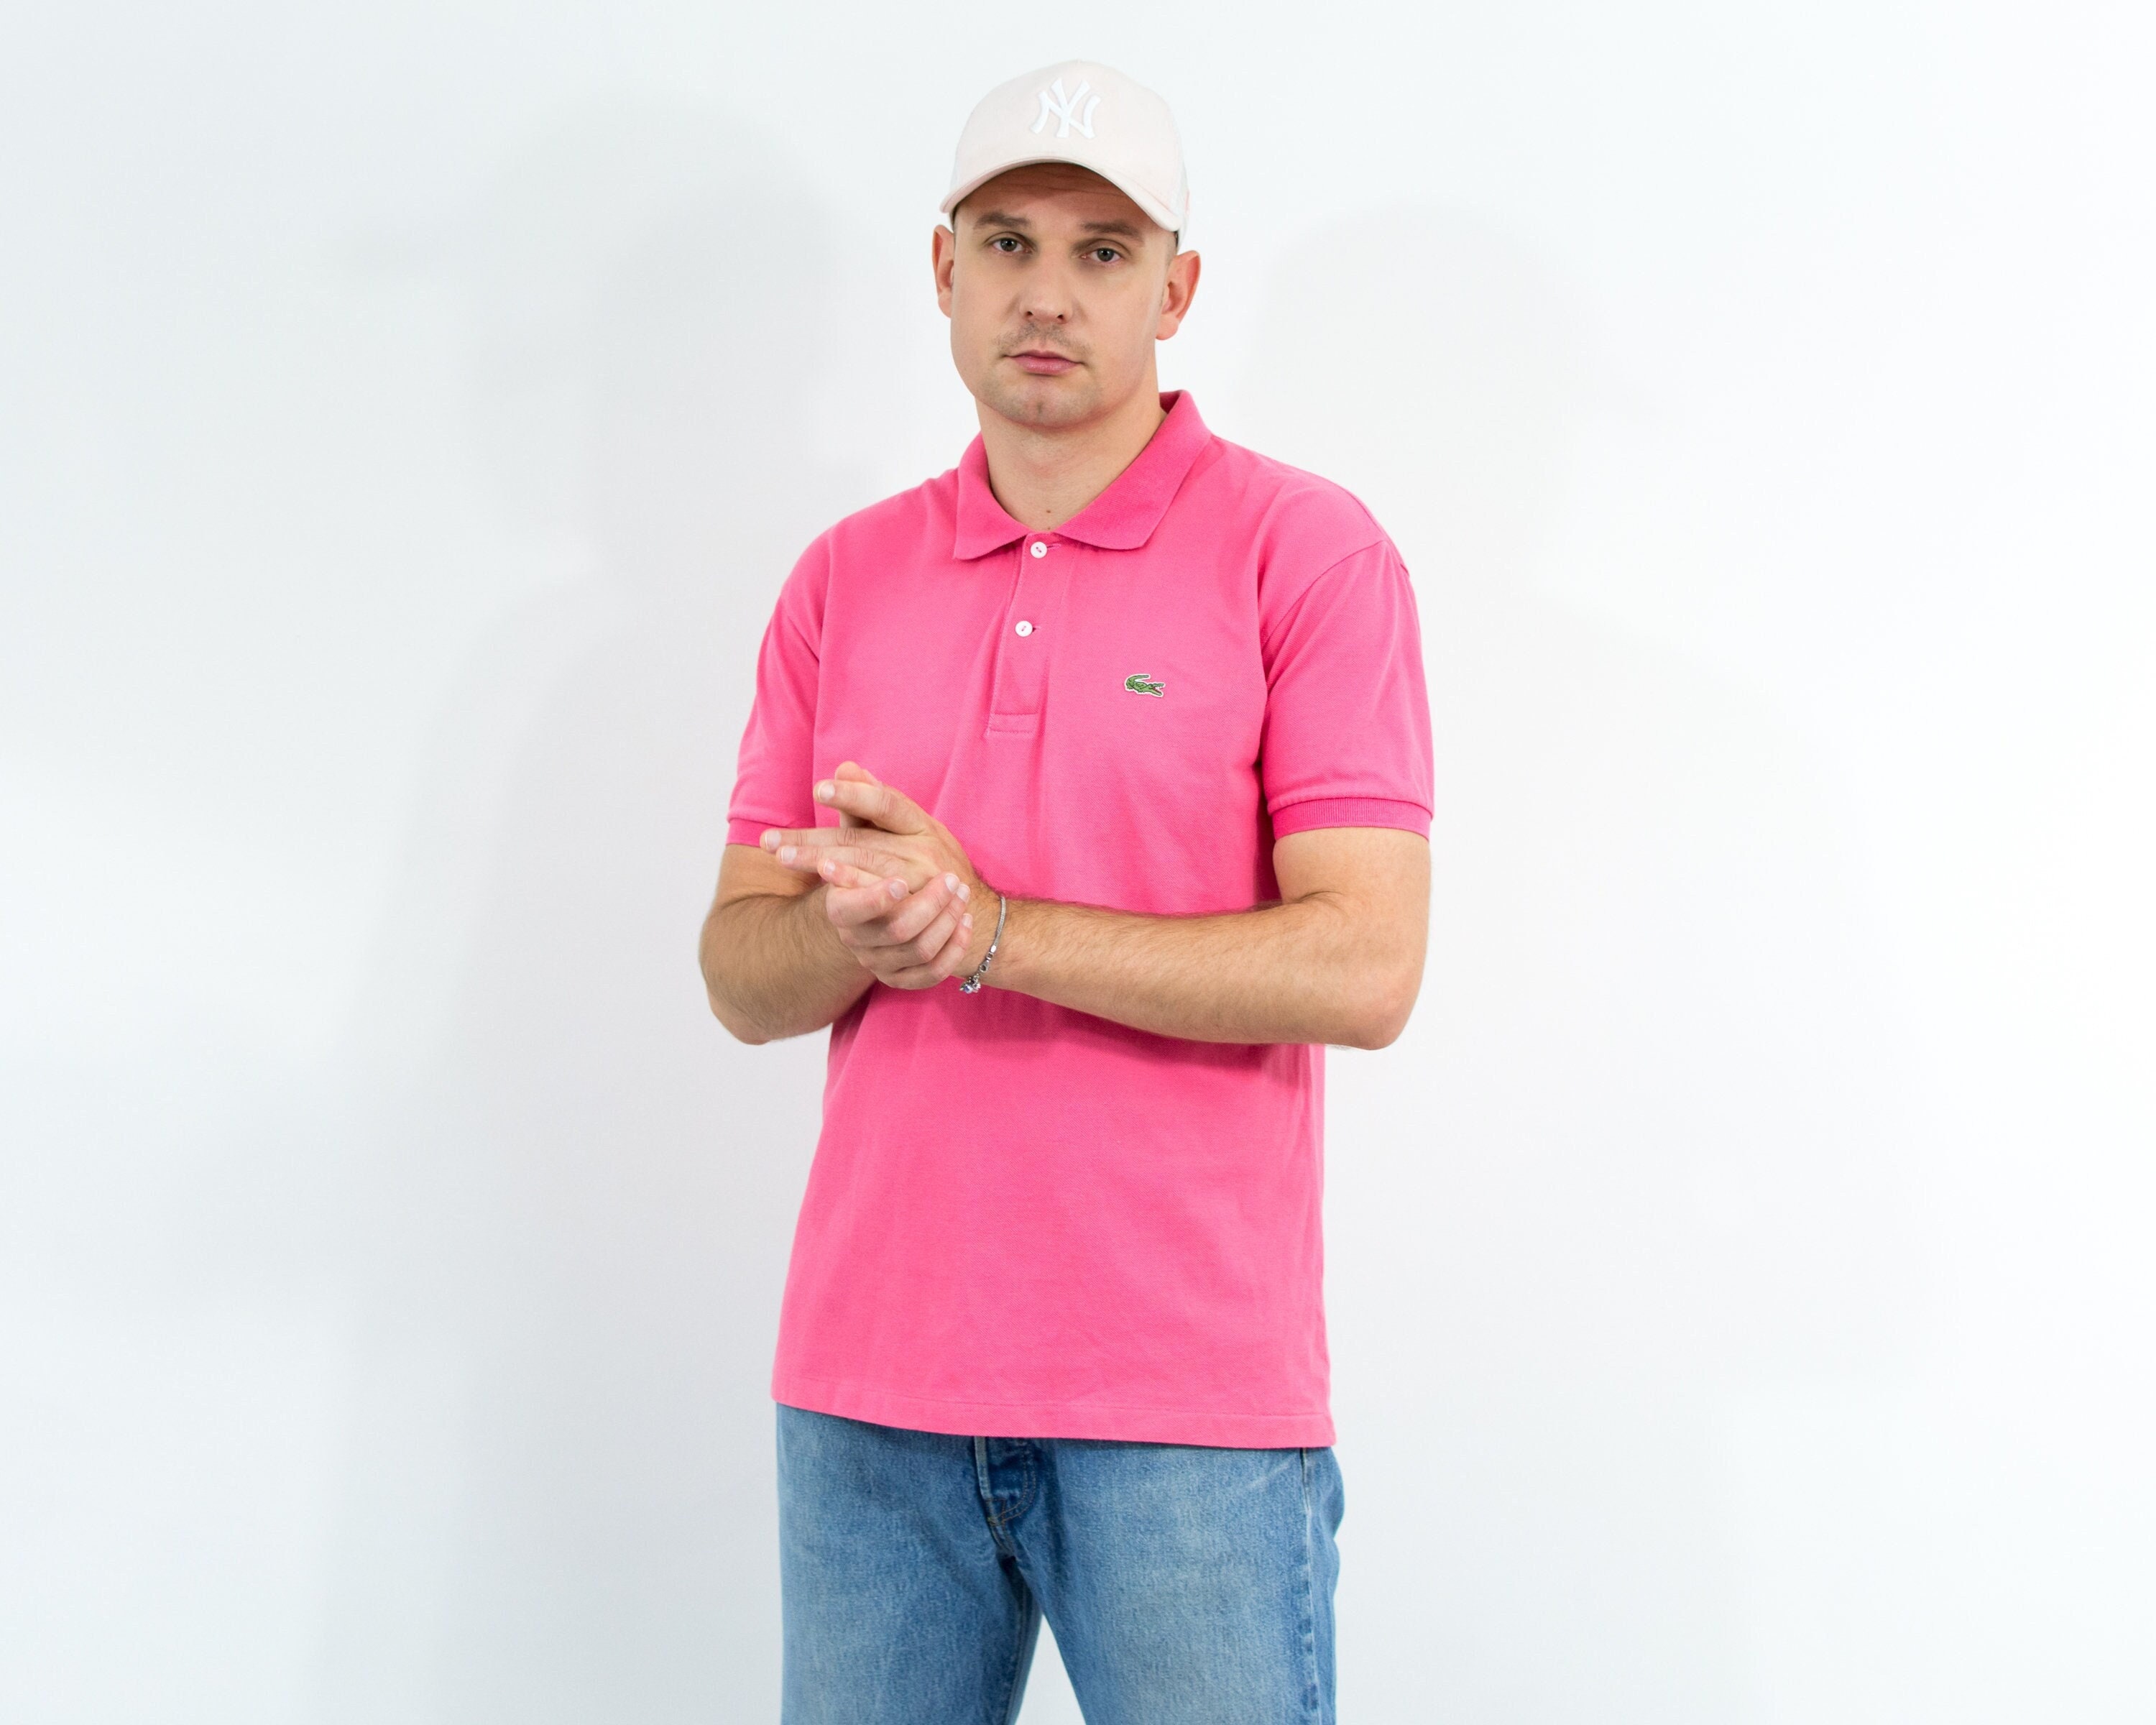 Lacoste Polo Shirt Pink Vintage Collared Top Men Short Etsy